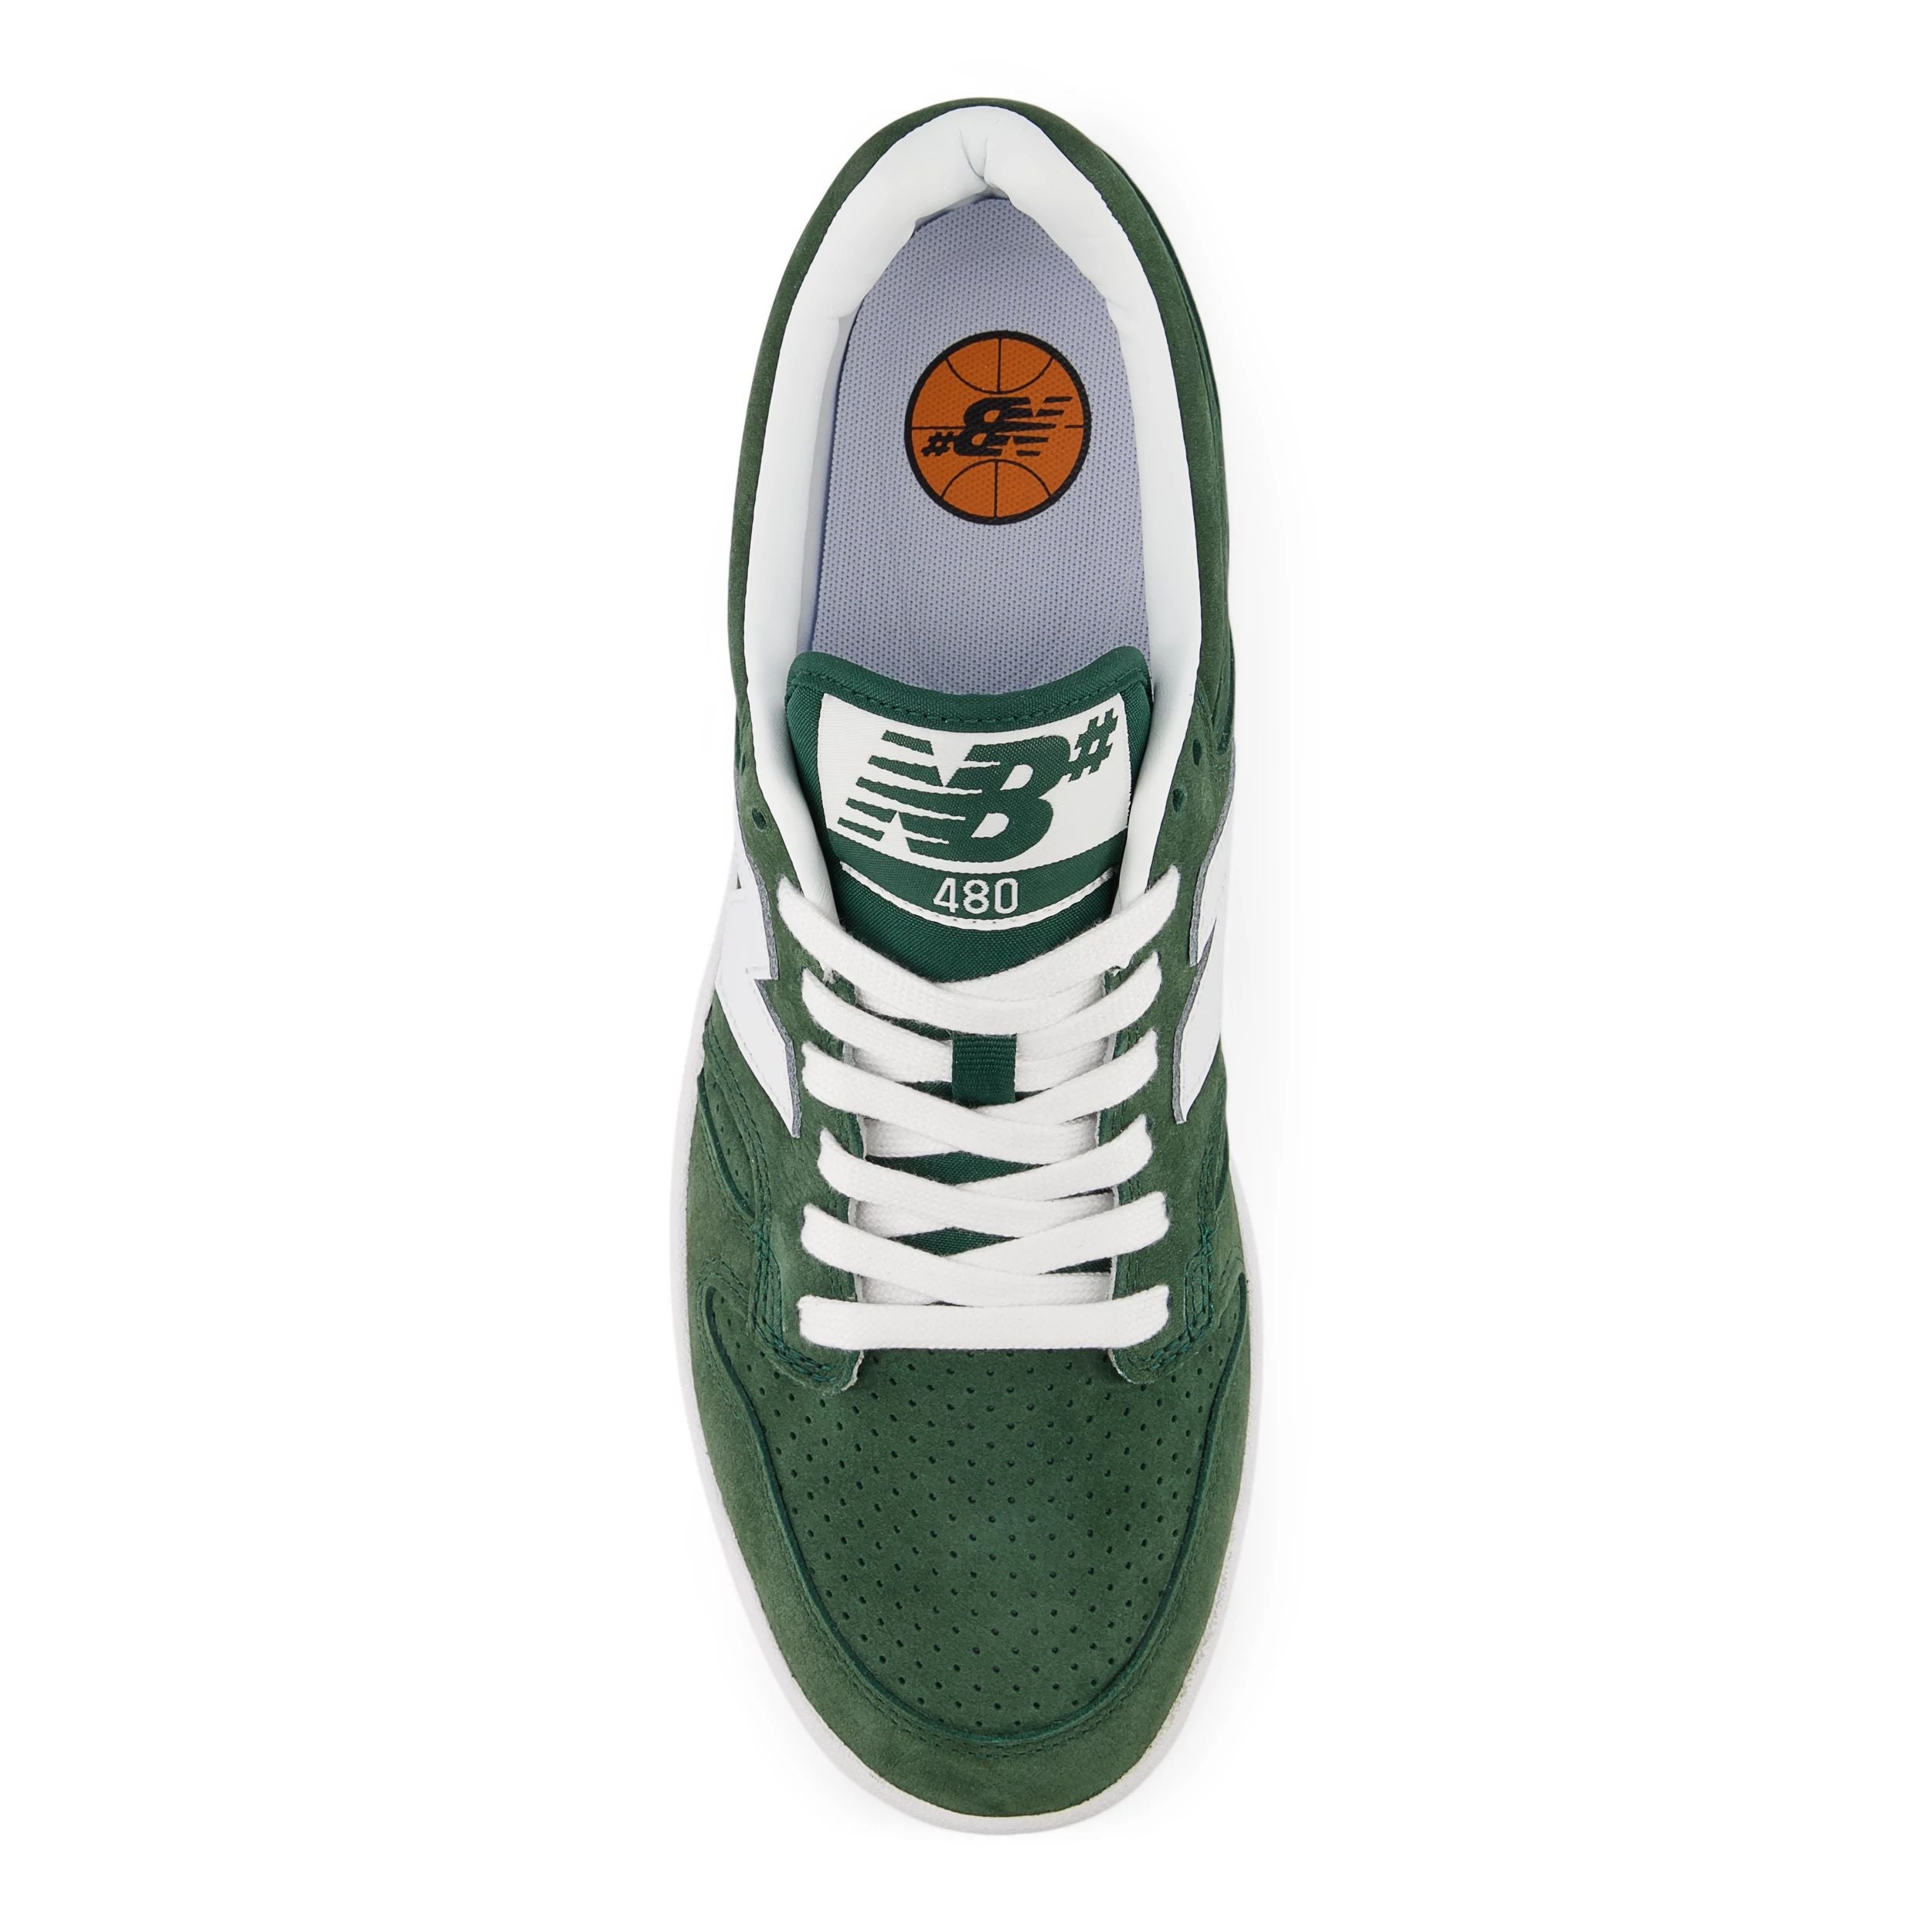 Forest Green 480 NB Numeric Skate Shoe Top